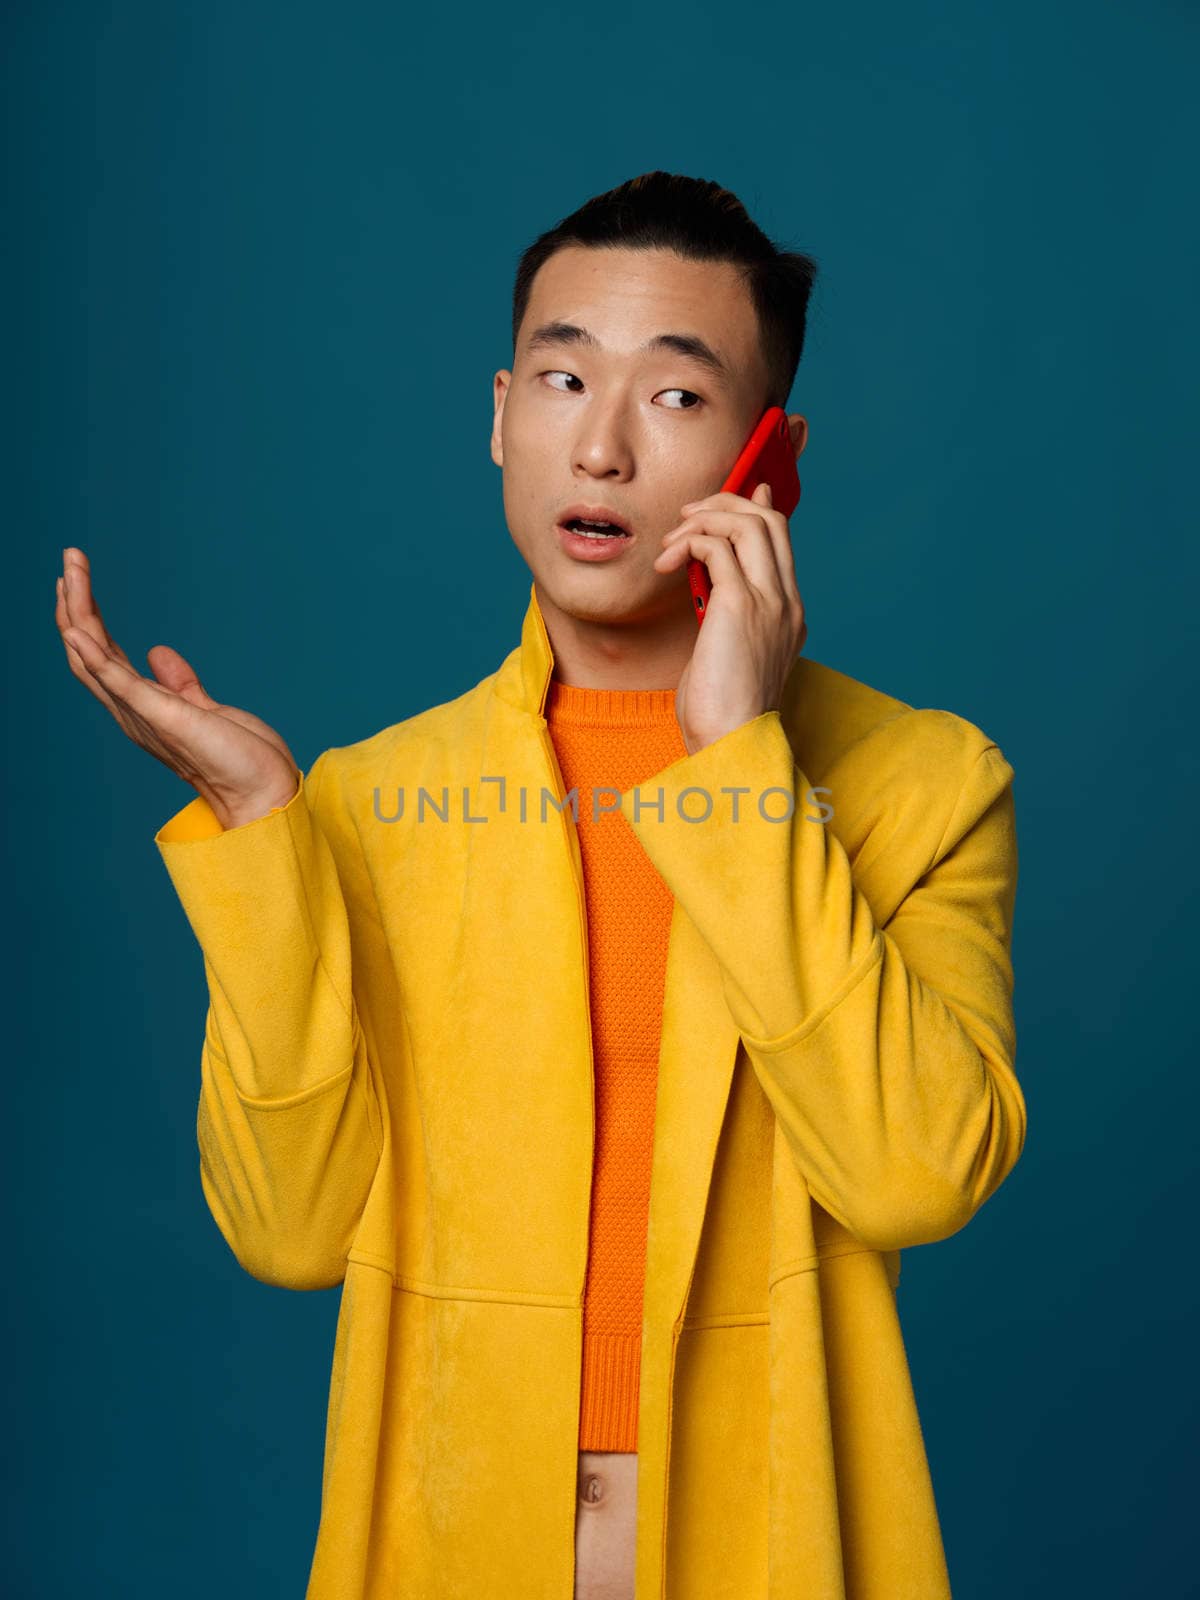 A fashionable man in a yellow jacket and an orange T-shirt is talking on the phone on a blue background by SHOTPRIME